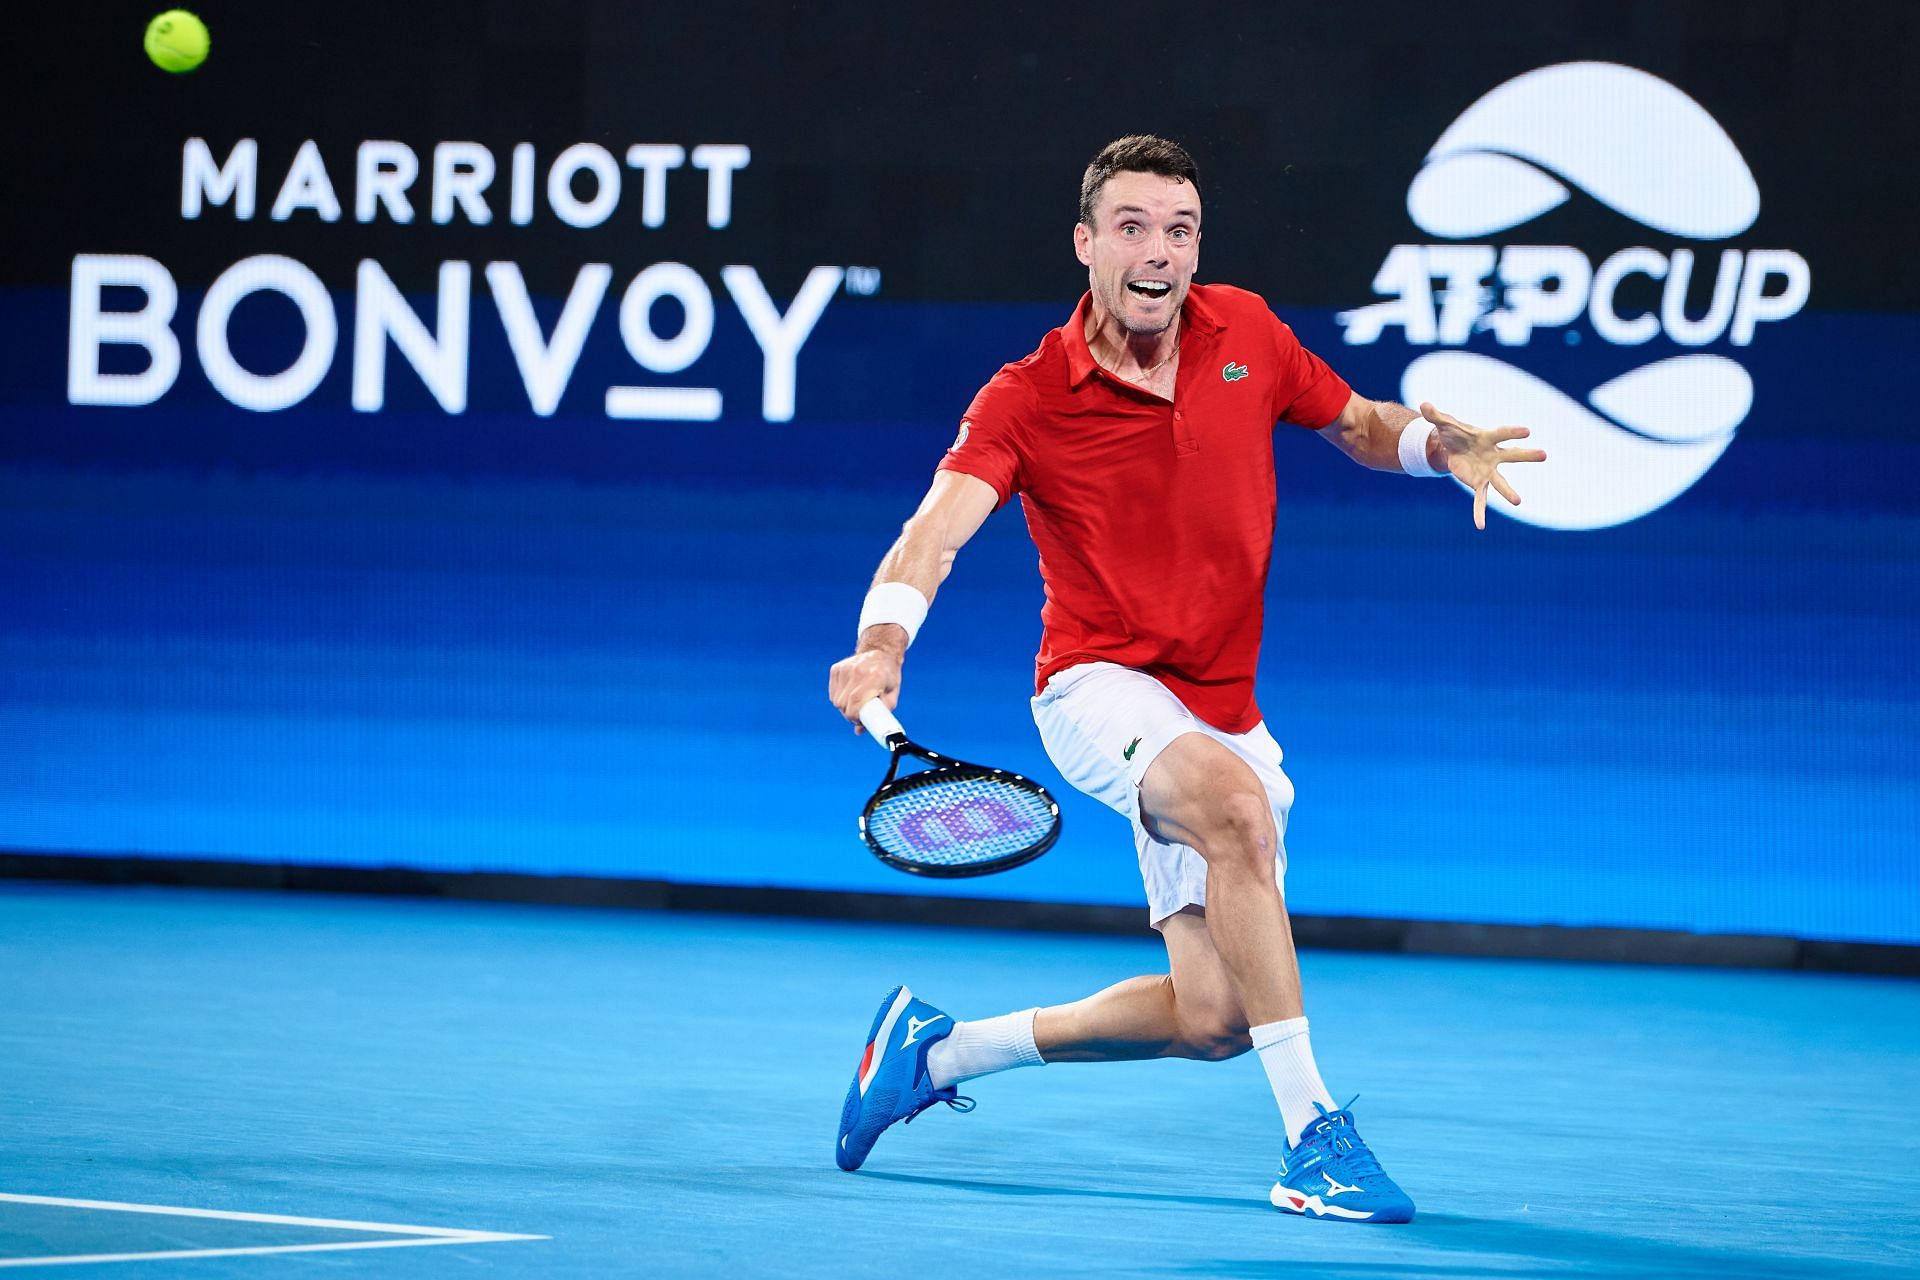 Roberto Bautista Agut impressed for Spain in the ATP Cup